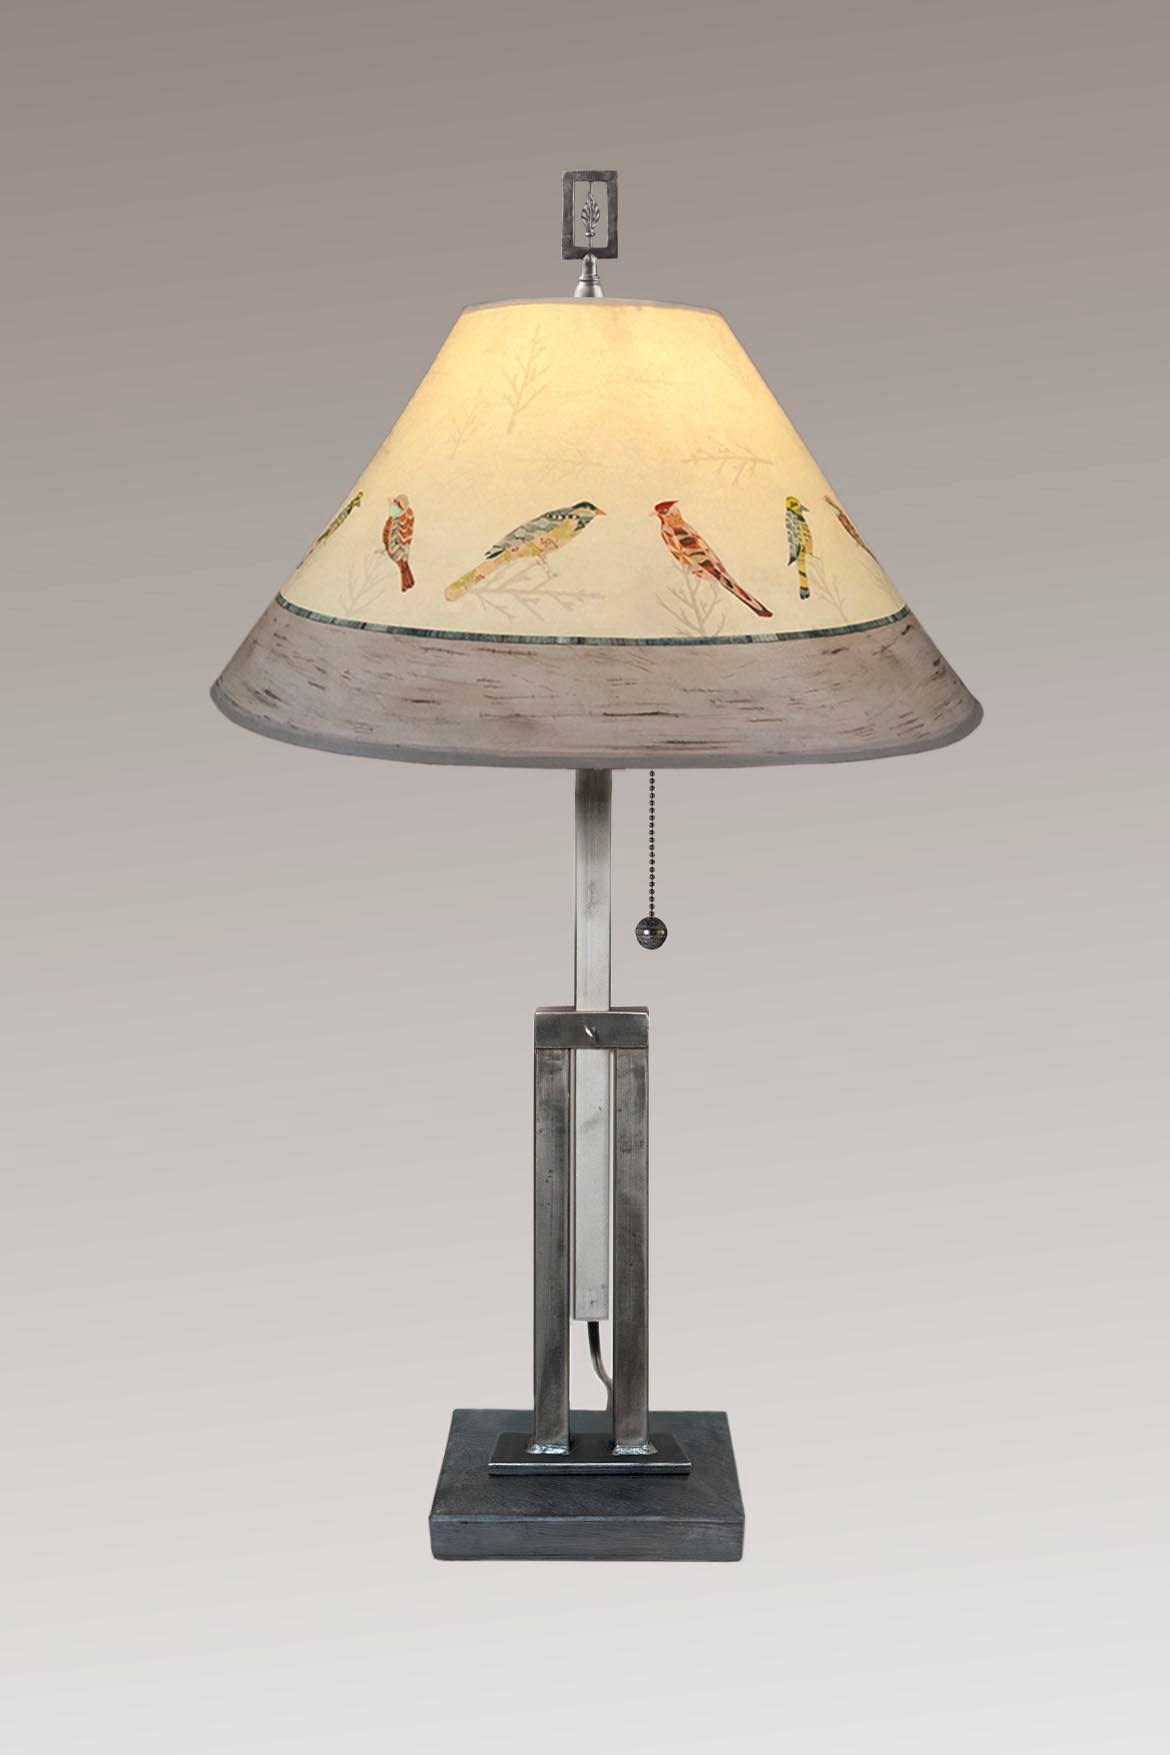 Janna Ugone & Co Table Lamps Adjustable-Height Steel Table Lamp with Large Conical Shade in Bird Friends